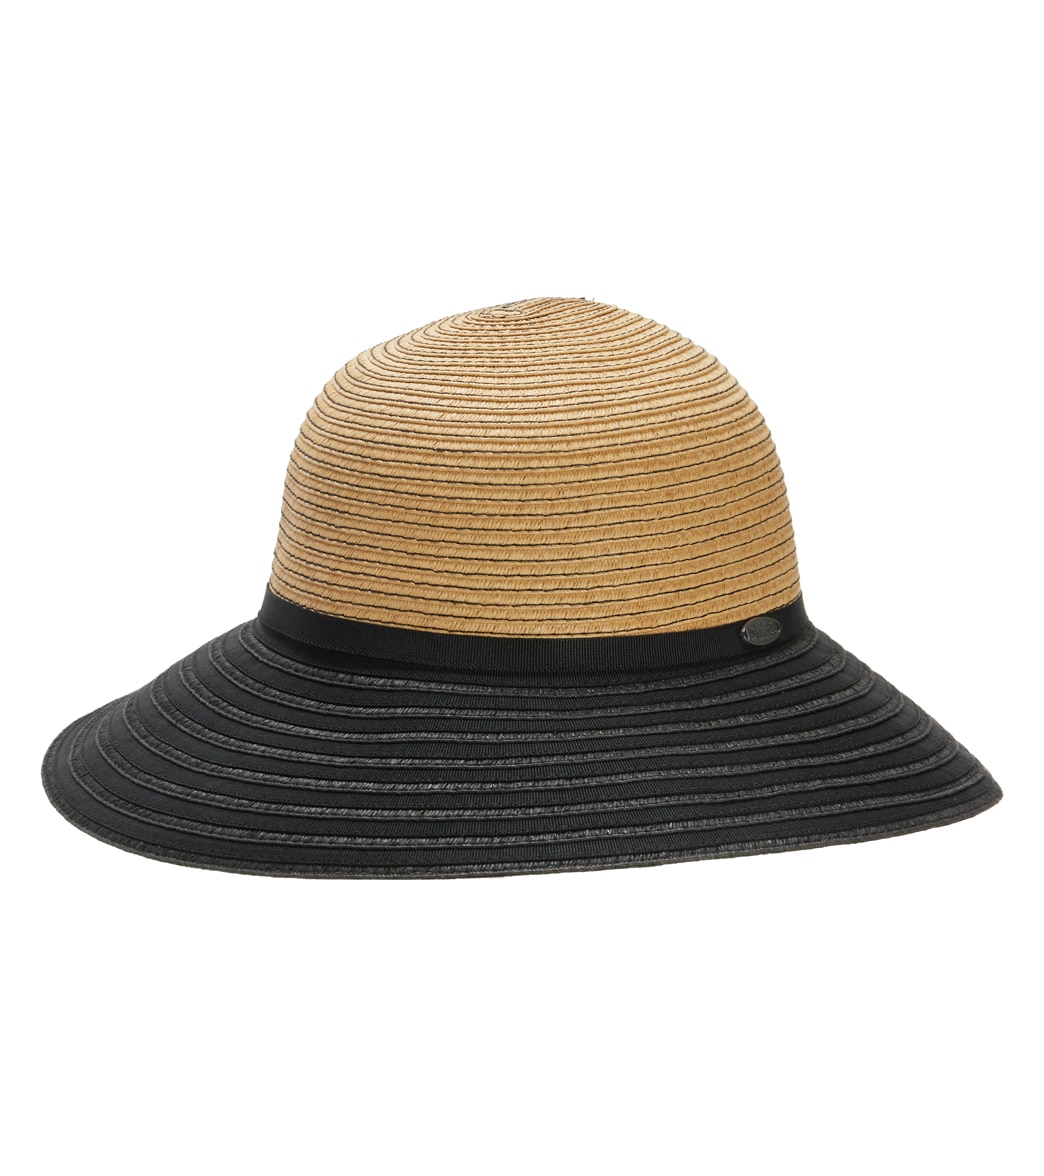 Wallaroo Women's Riviera Two Tone Paper Braid Hat - Camel/Black One Size Polyester - Swimoutlet.com